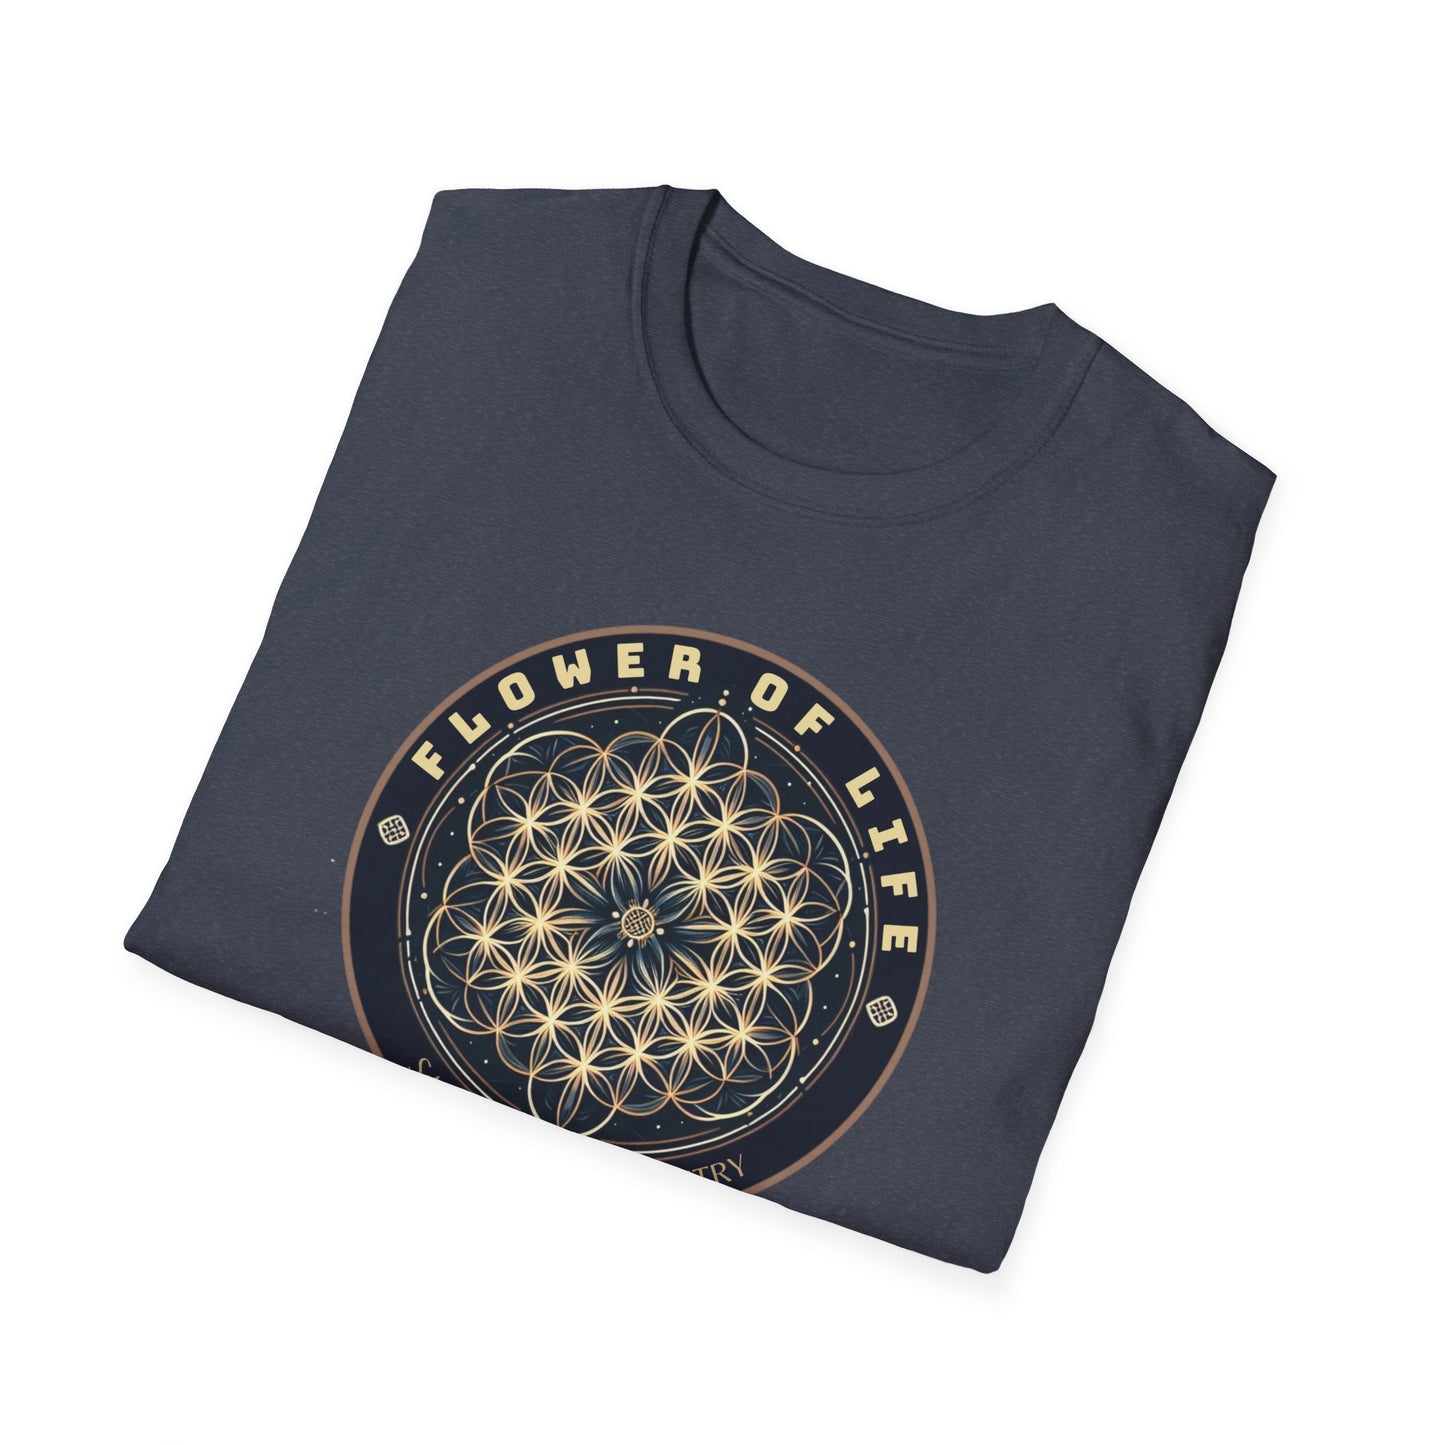 Eternal Unity: Unisex Cotton Tee Featuring the Flower of Life